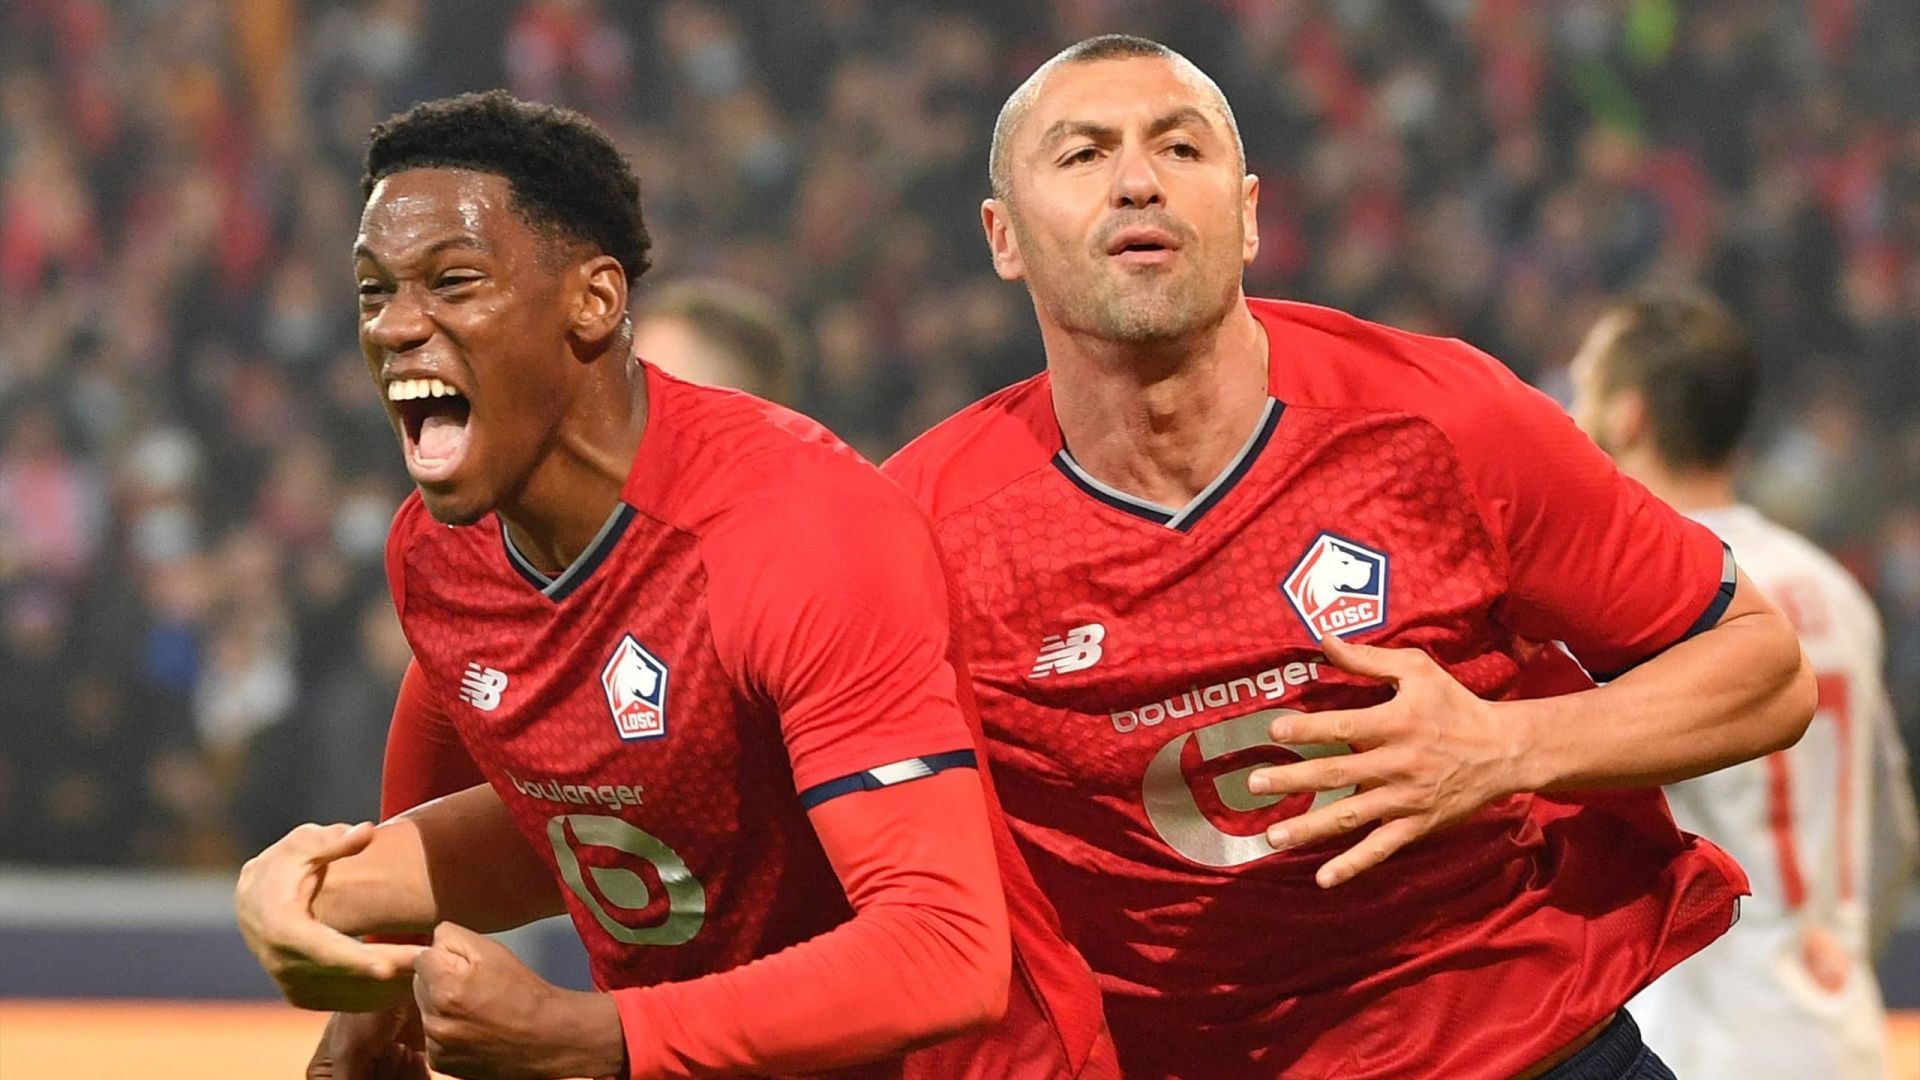 Can Lille pick up an important win over Nantes in Ligue 1 this weekend?